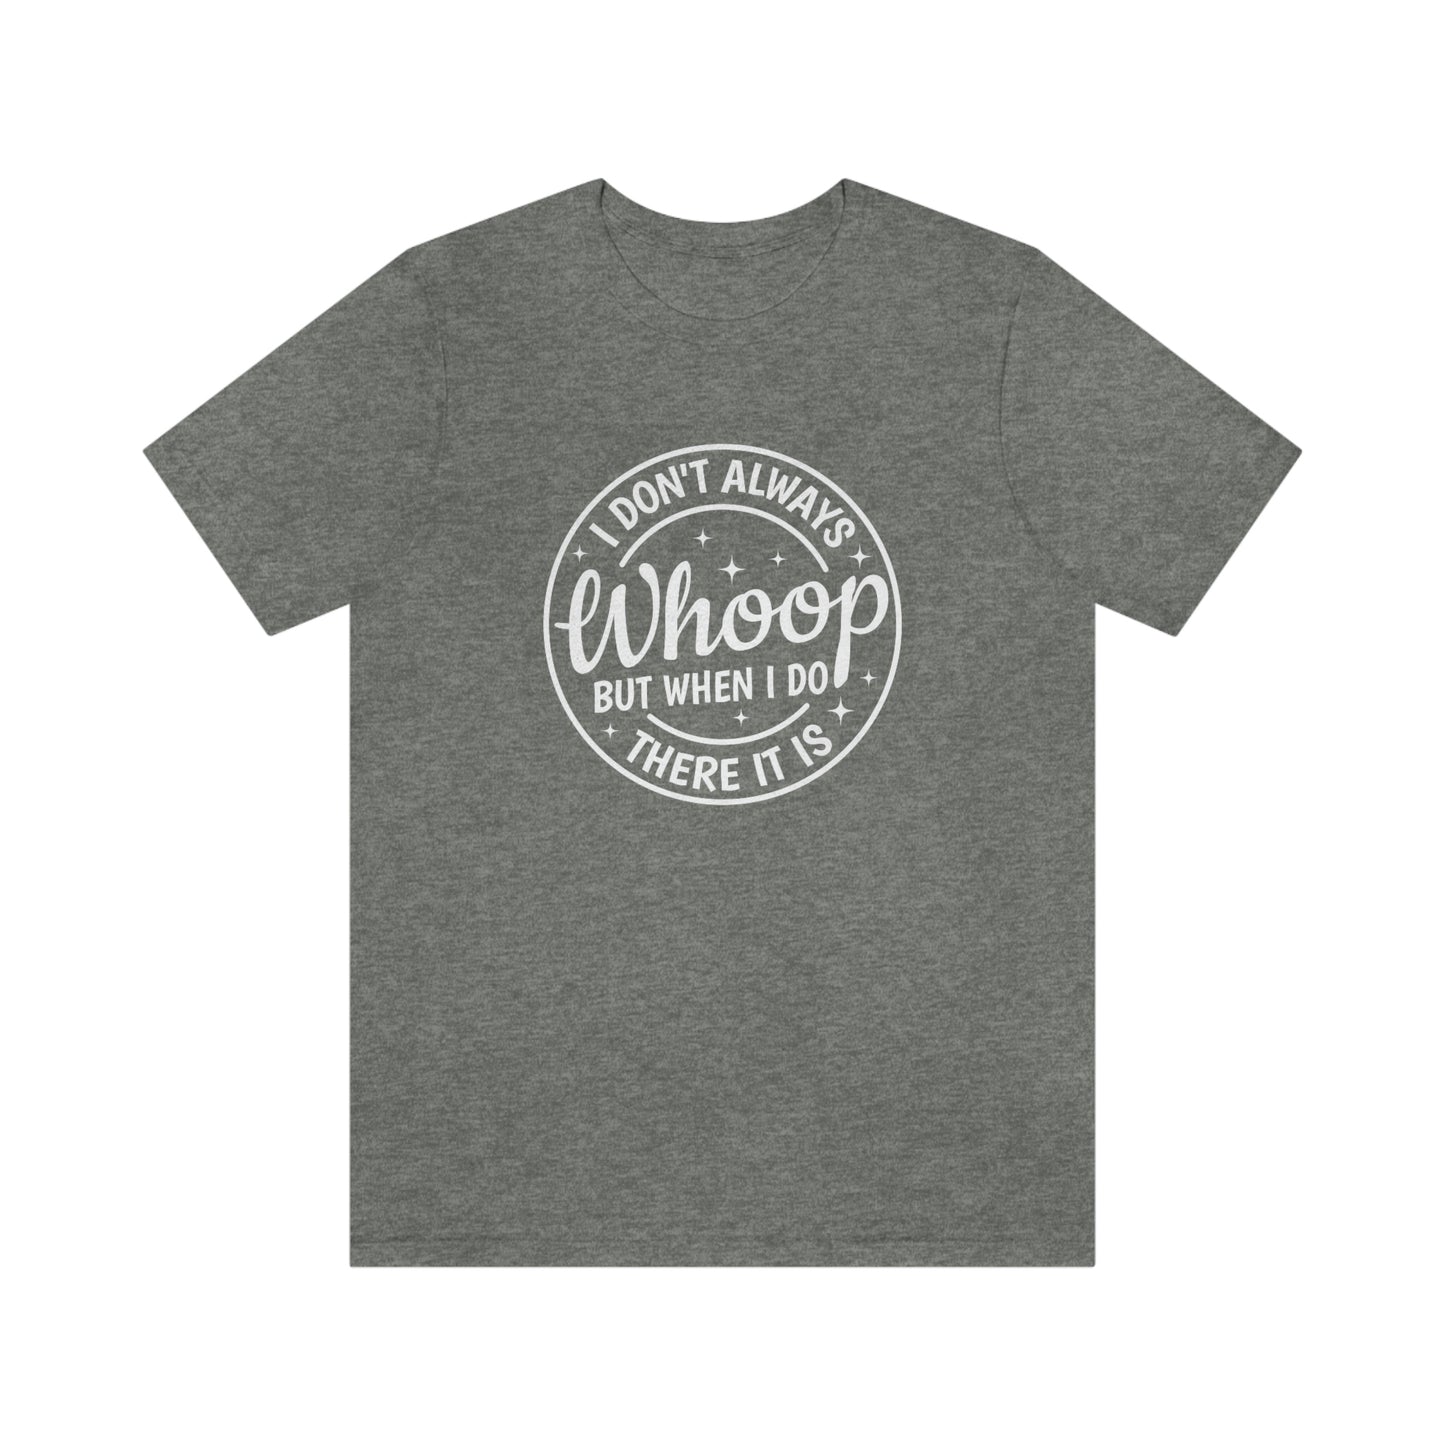 "Whoop there it is" Unisex Jersey Short Sleeve Tee